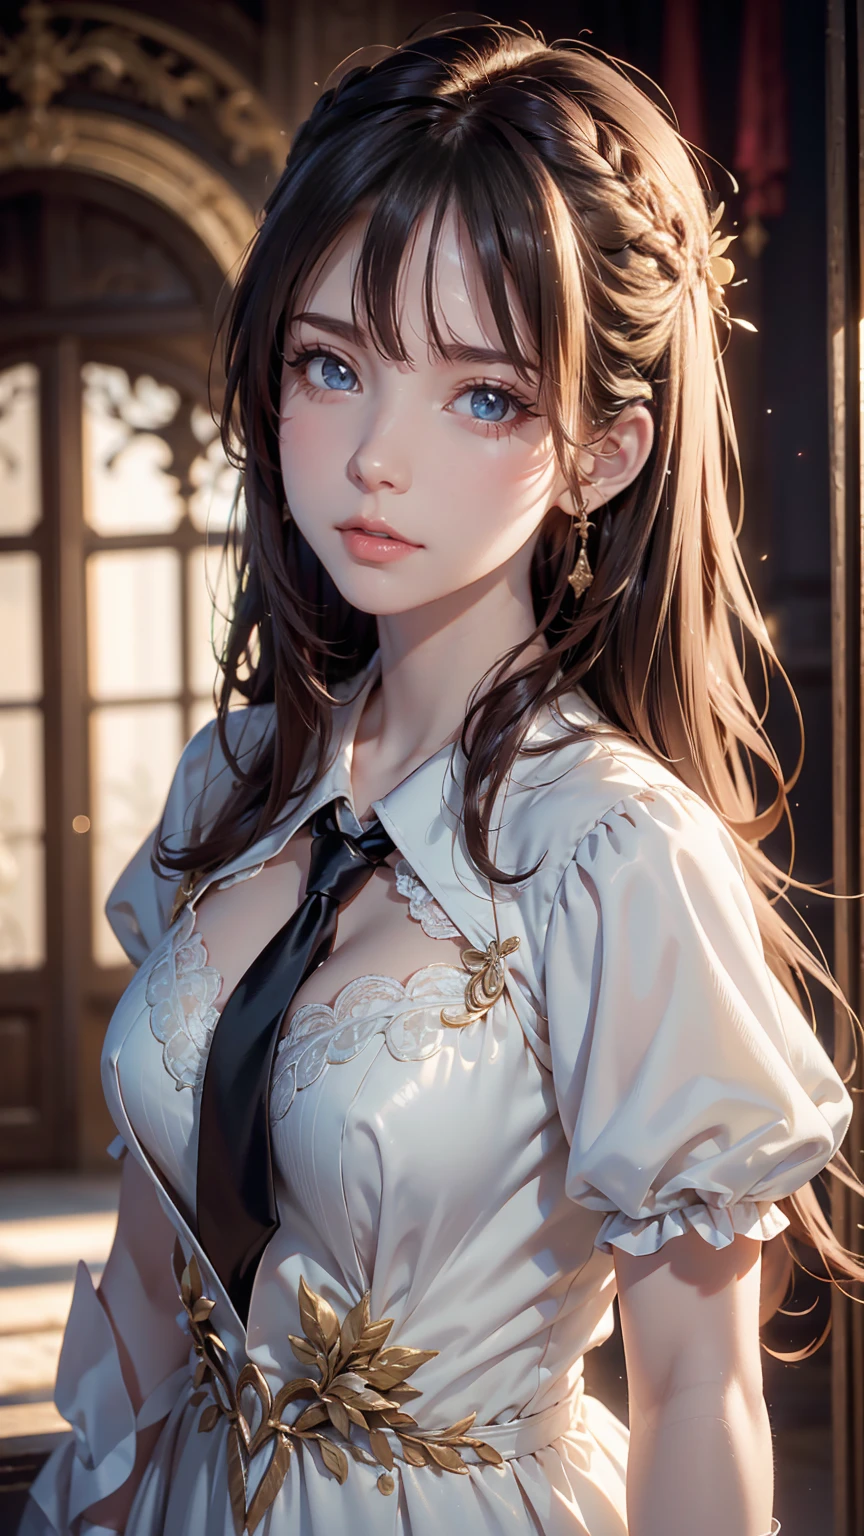 8K, Highest quality, masterpiece:1.2), (Realistic, photo-Realistic:1.37), Highest quality, masterpiece, Beautiful young woman, Pensive expression, Thoughtful expression, Elegant clothing, Tie your hair back, Messy mood, Movie Background, tired, Light skin tone